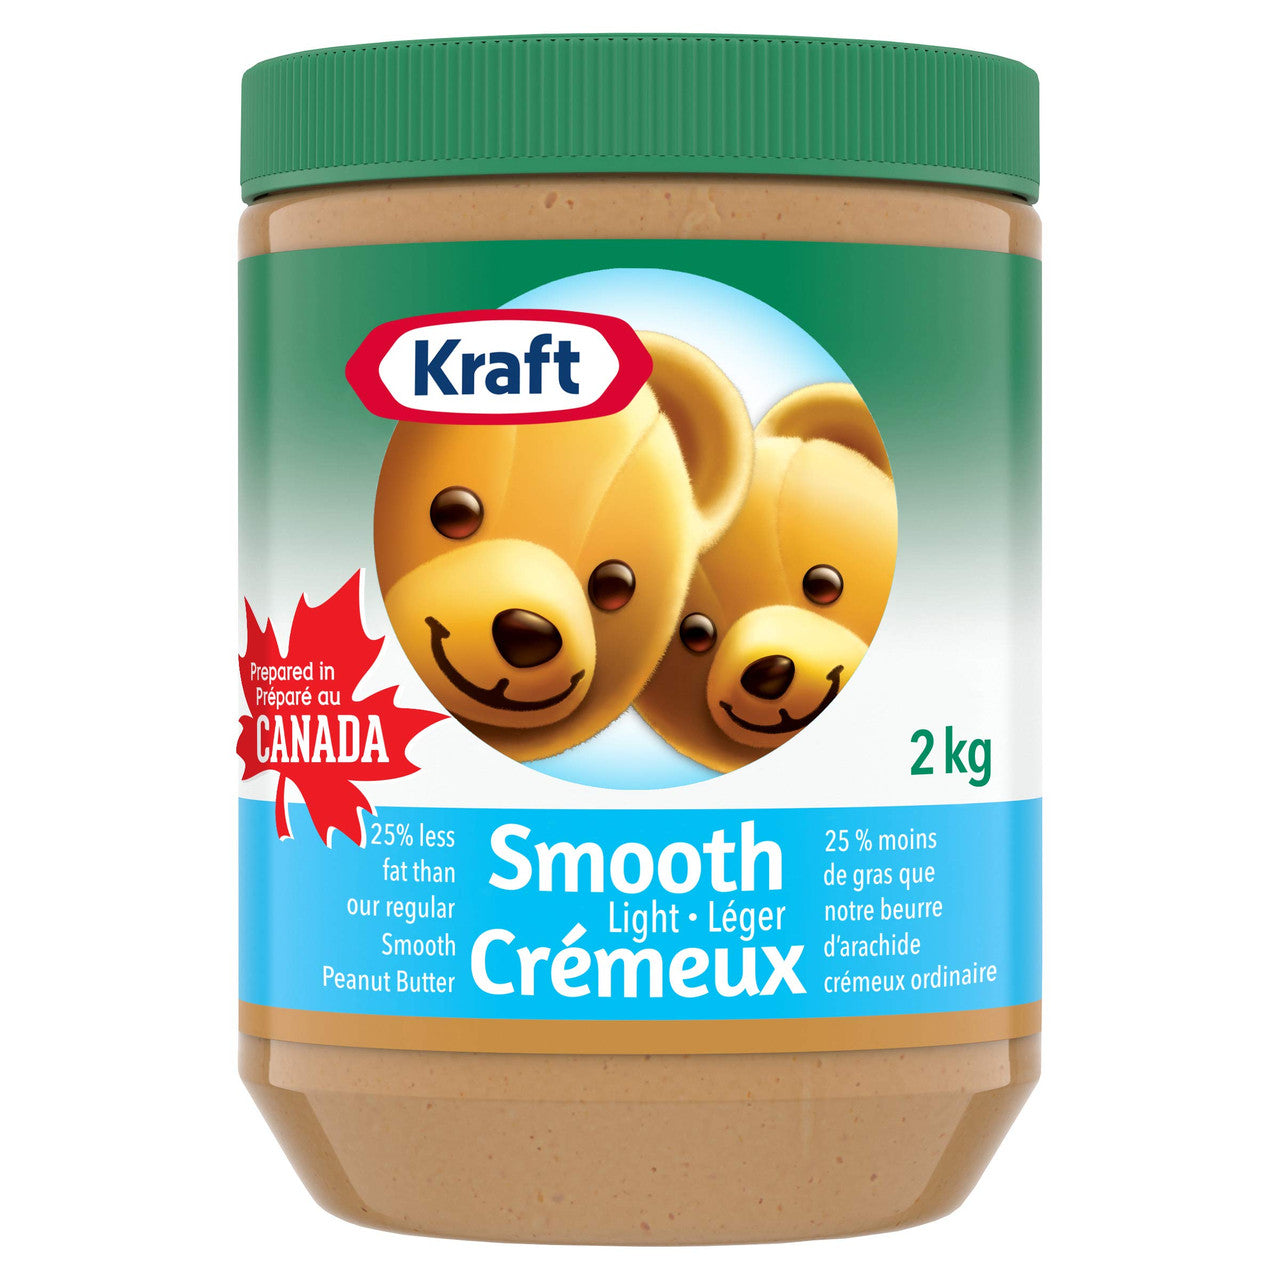 Kraft Peanut Butter Smooth - Light,  2kg/4.4 lbs (Imported from Canada)